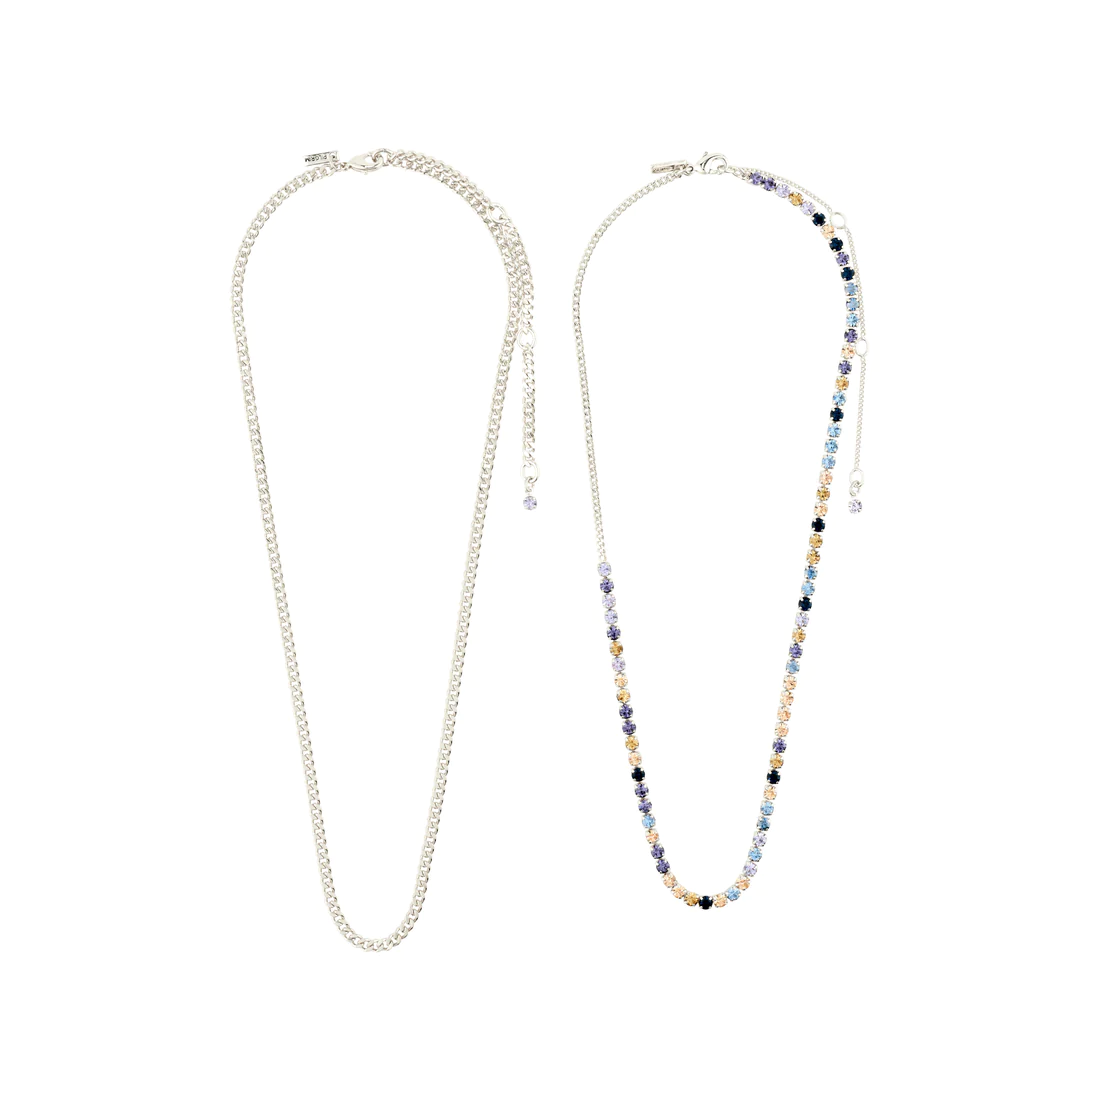 REIGN necklaces, 2-in-1 set